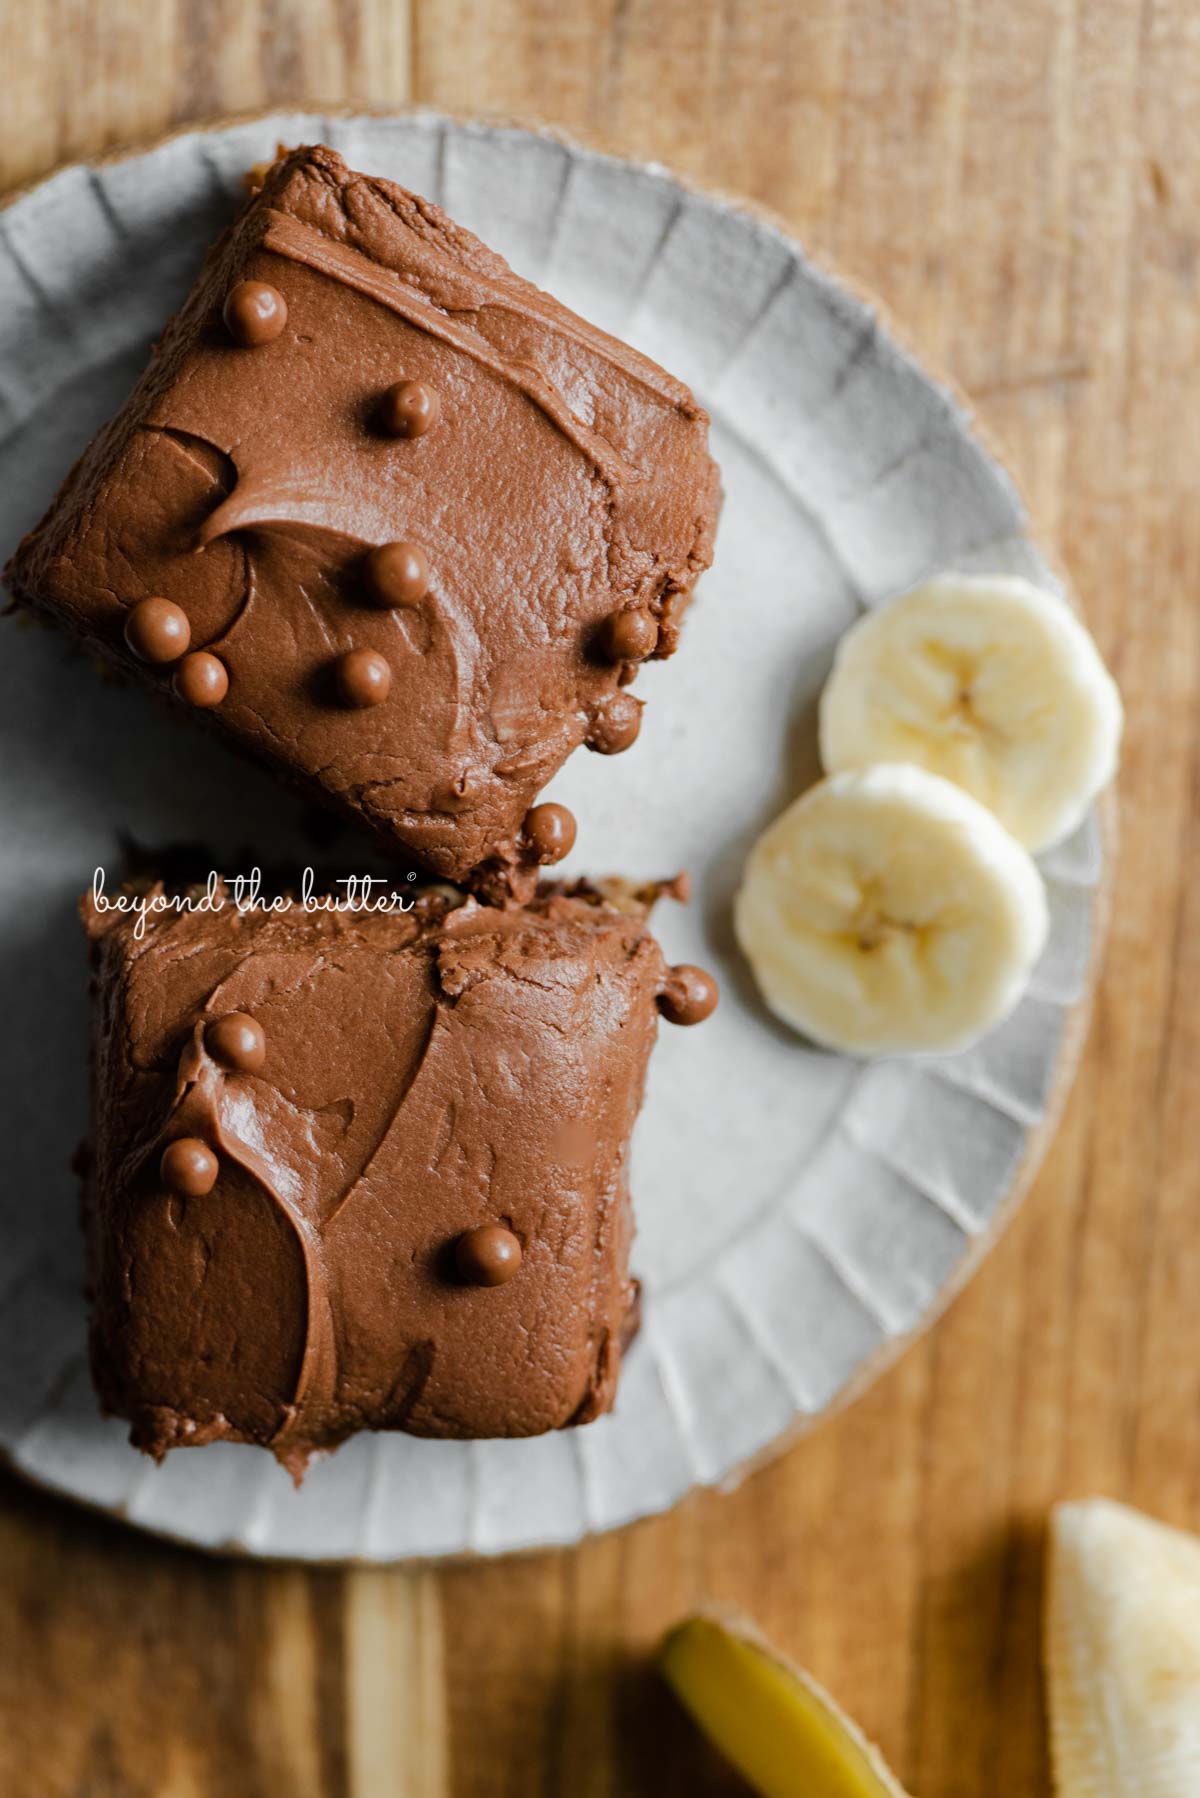 Dessert plate with slices of banana snack cake | All images © Beyond the Butter®